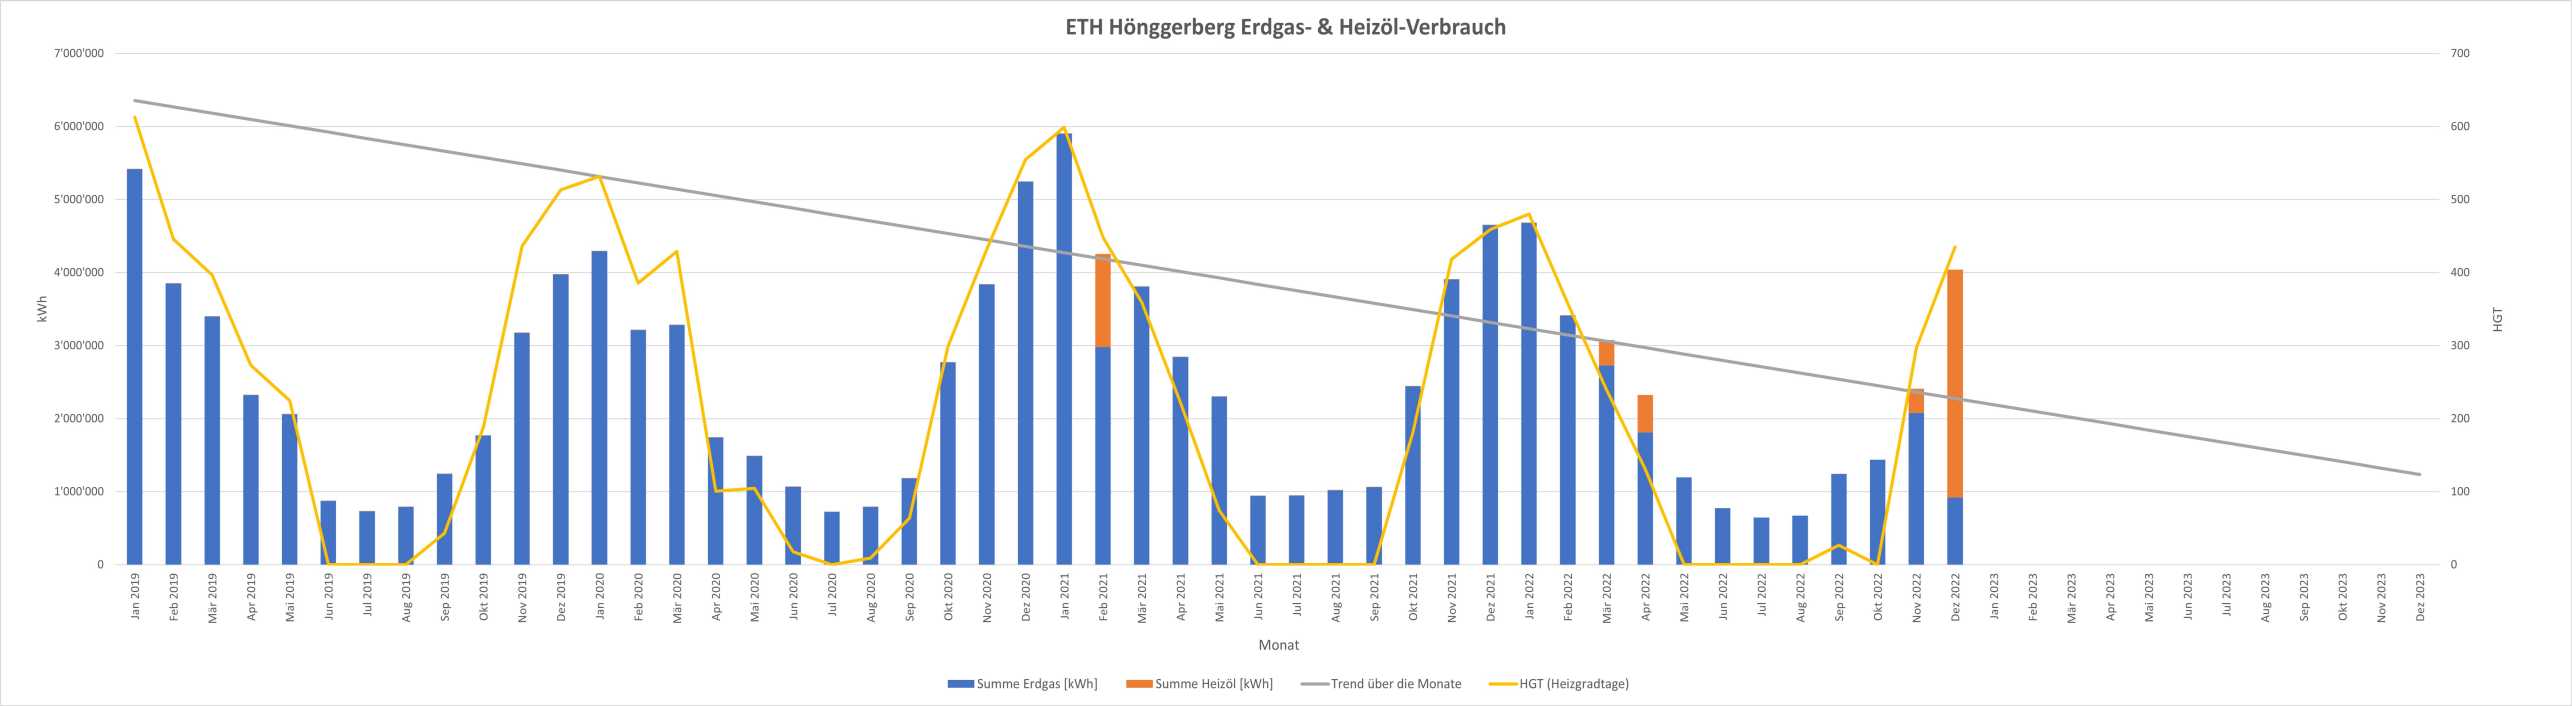 Enlarged view: A chart with blue and orange bars shows: ETH Zurich consumed less fossil energy (natural gas and heating oil) in December 2022 compared with previous years. (Chart: ETH Zurich / Engineering and Systems)